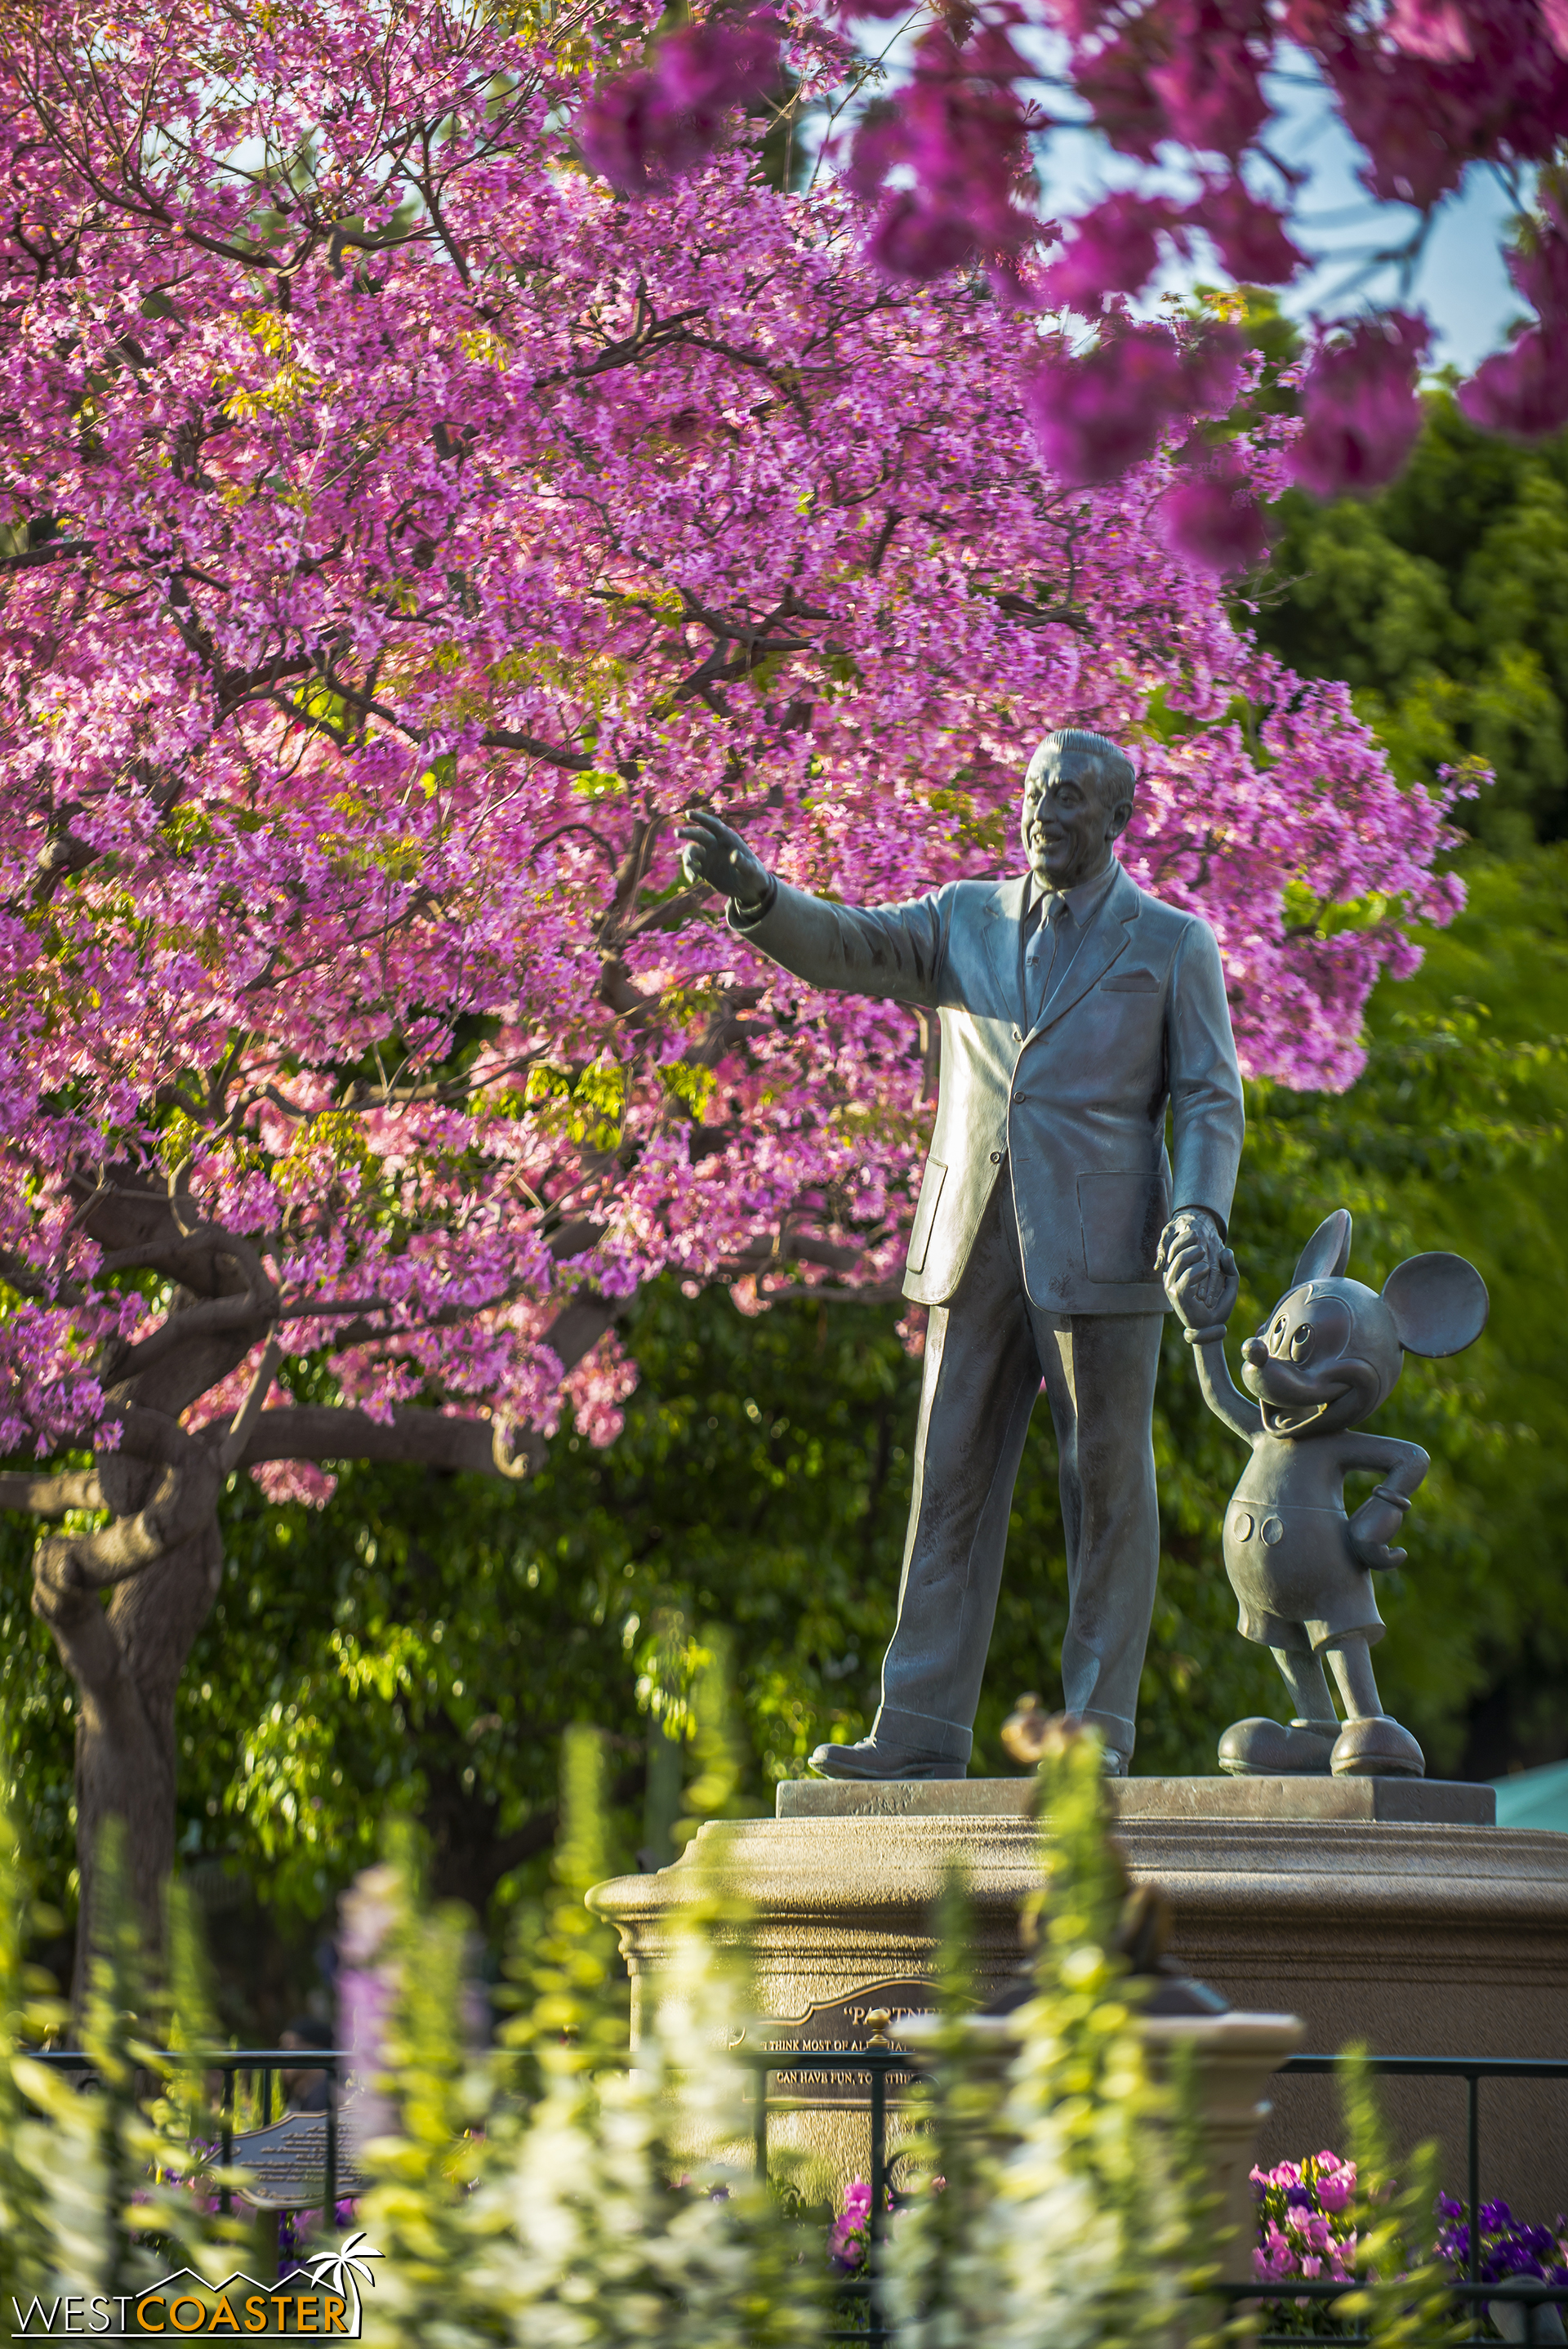  The tabebuias over at The Hub in Disneyland have also started turning their beautiful springtime pink, which is pretty fantastic. 